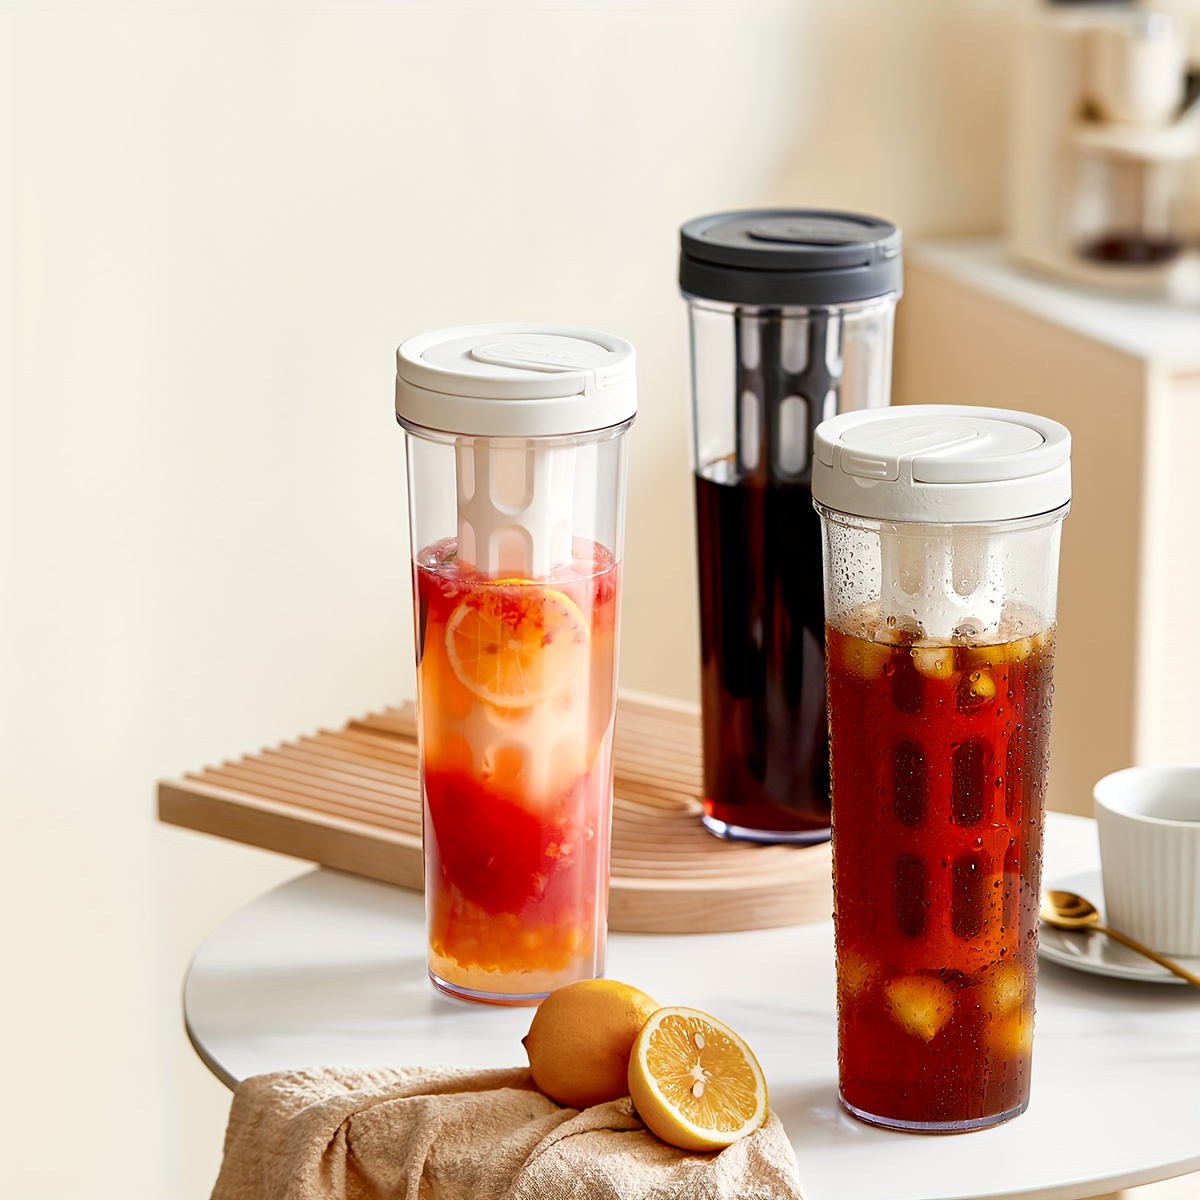 

1pc, Modern Plastic Water Bottle With Infuser (3.78''x10.4''/9.6cm*26.5cm), Coffee Tea Fruit Infusion Cup, Leak-proof, On-the-go Hydration, Durable, Bpa-free, Kitchenware, Portable Beverage Container